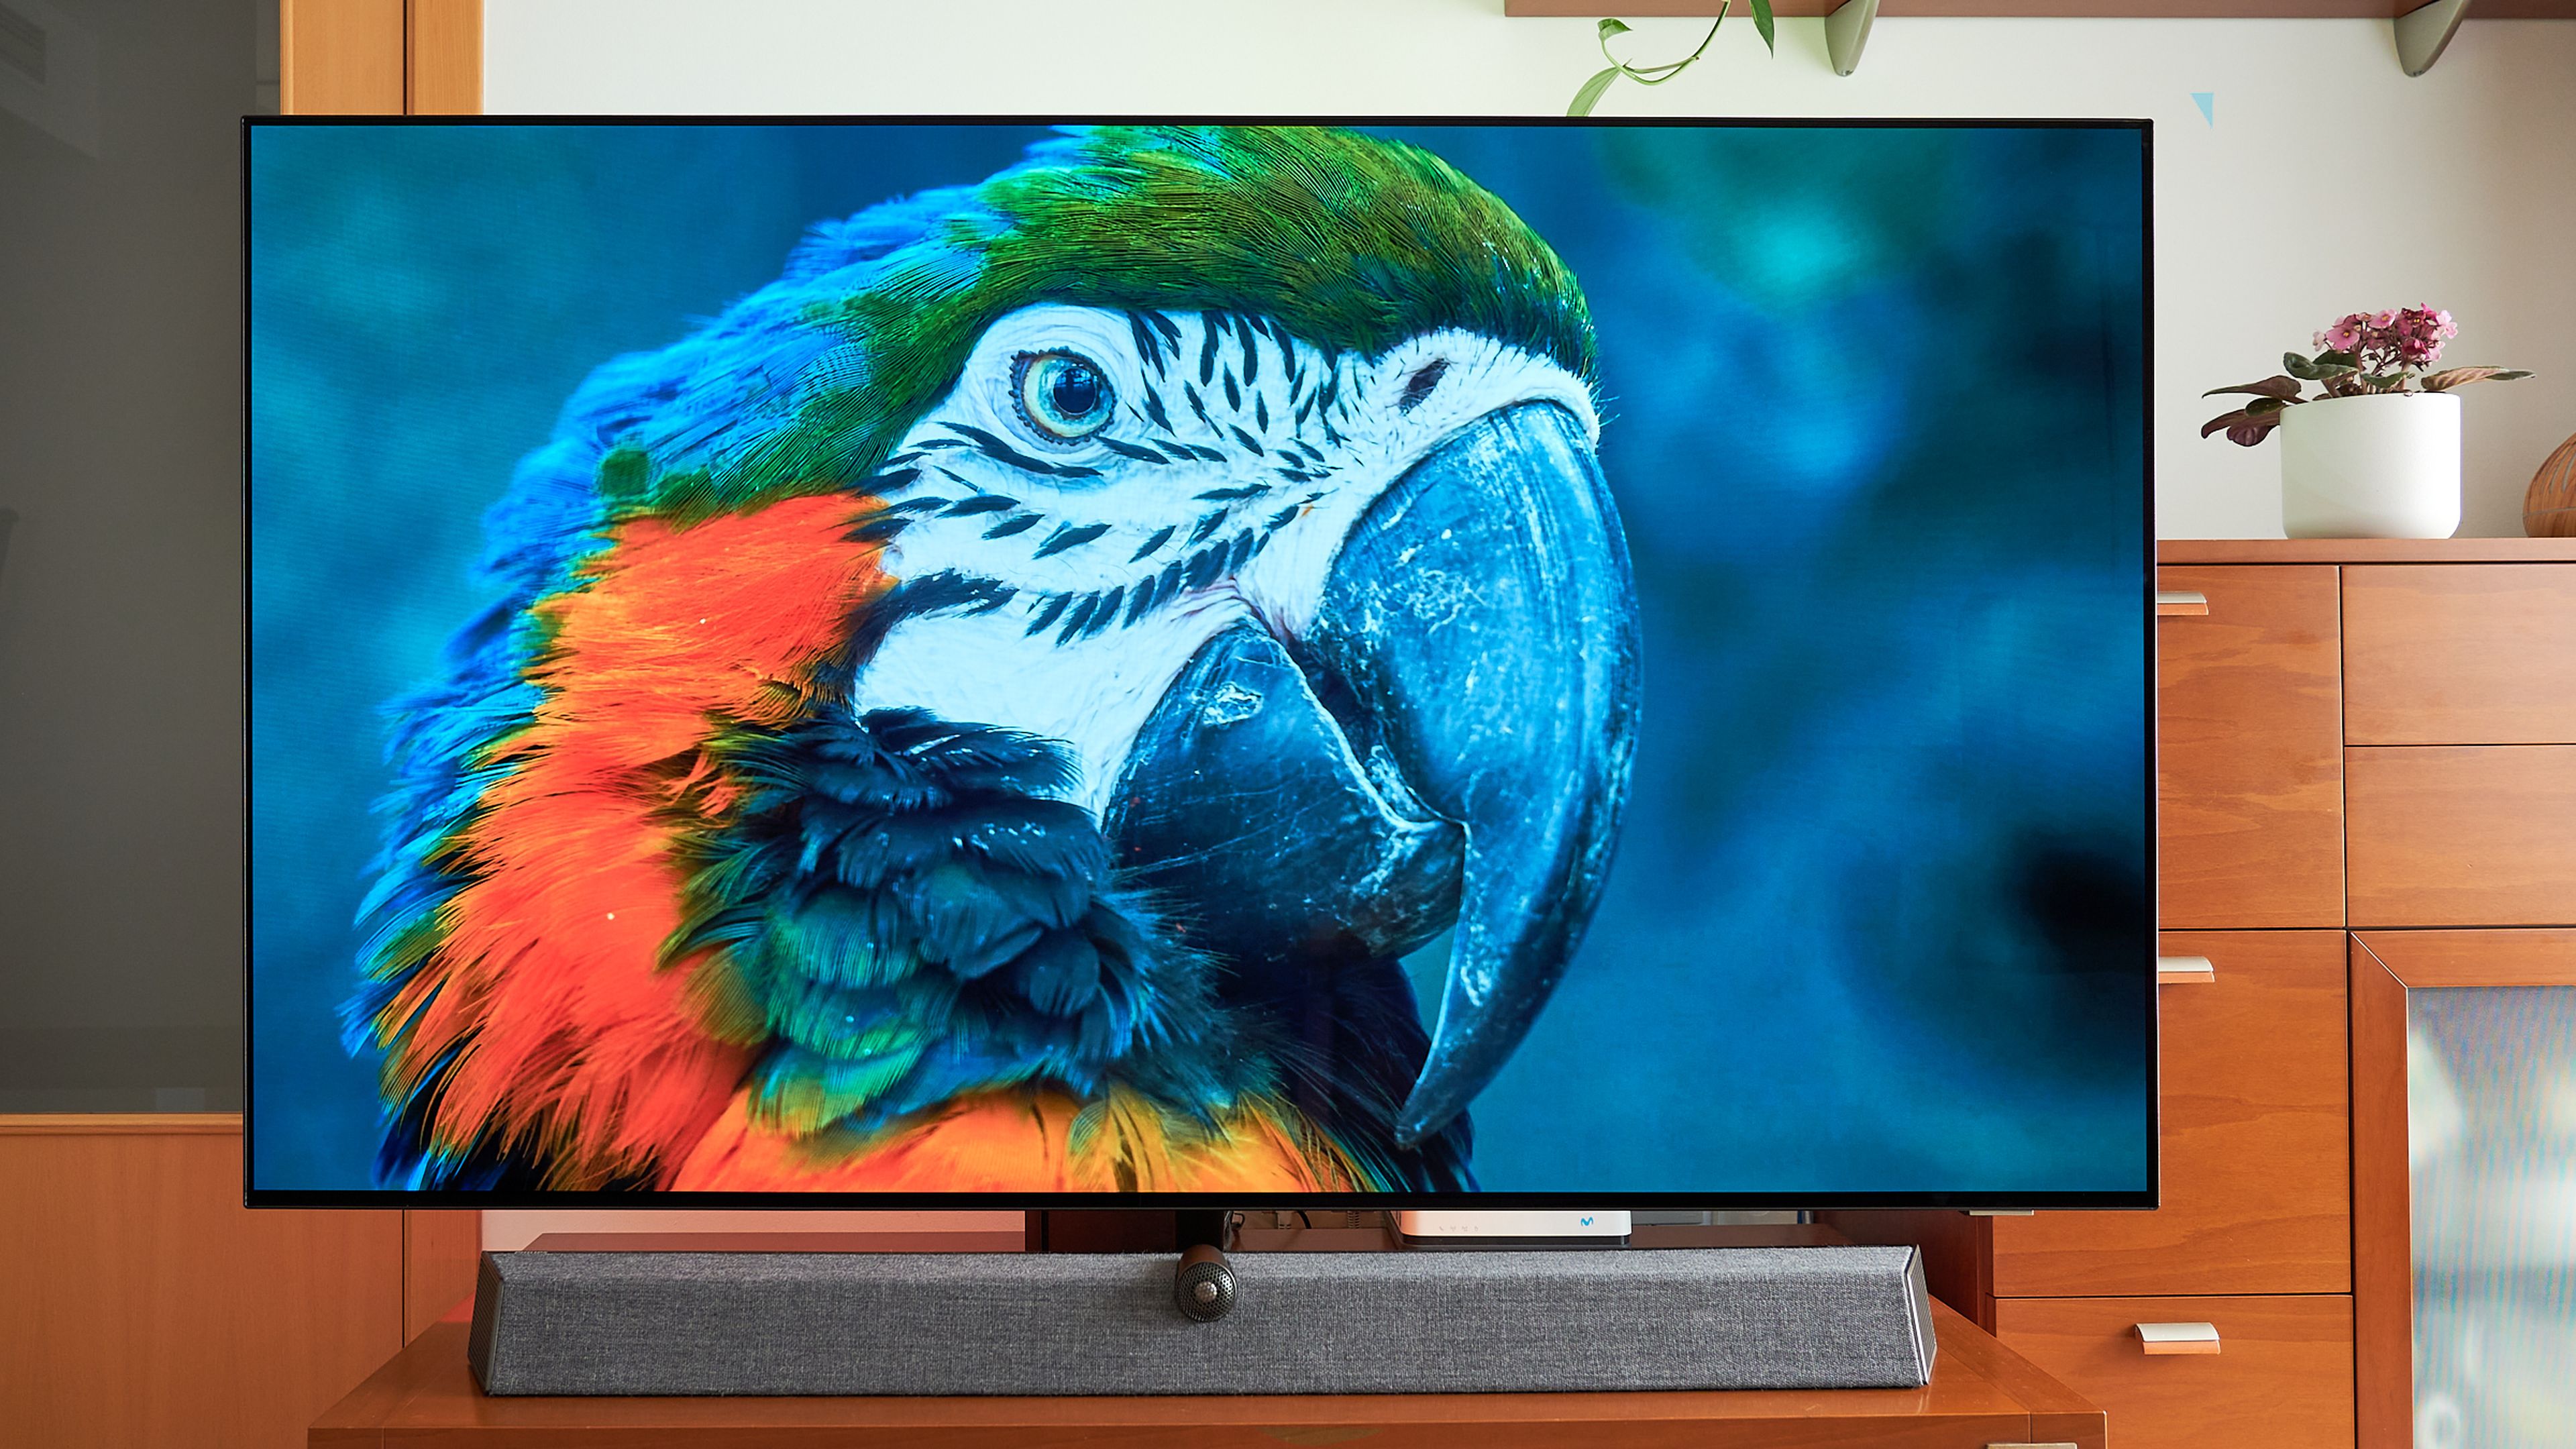 Philips OLED+ 937, analysis and opinion